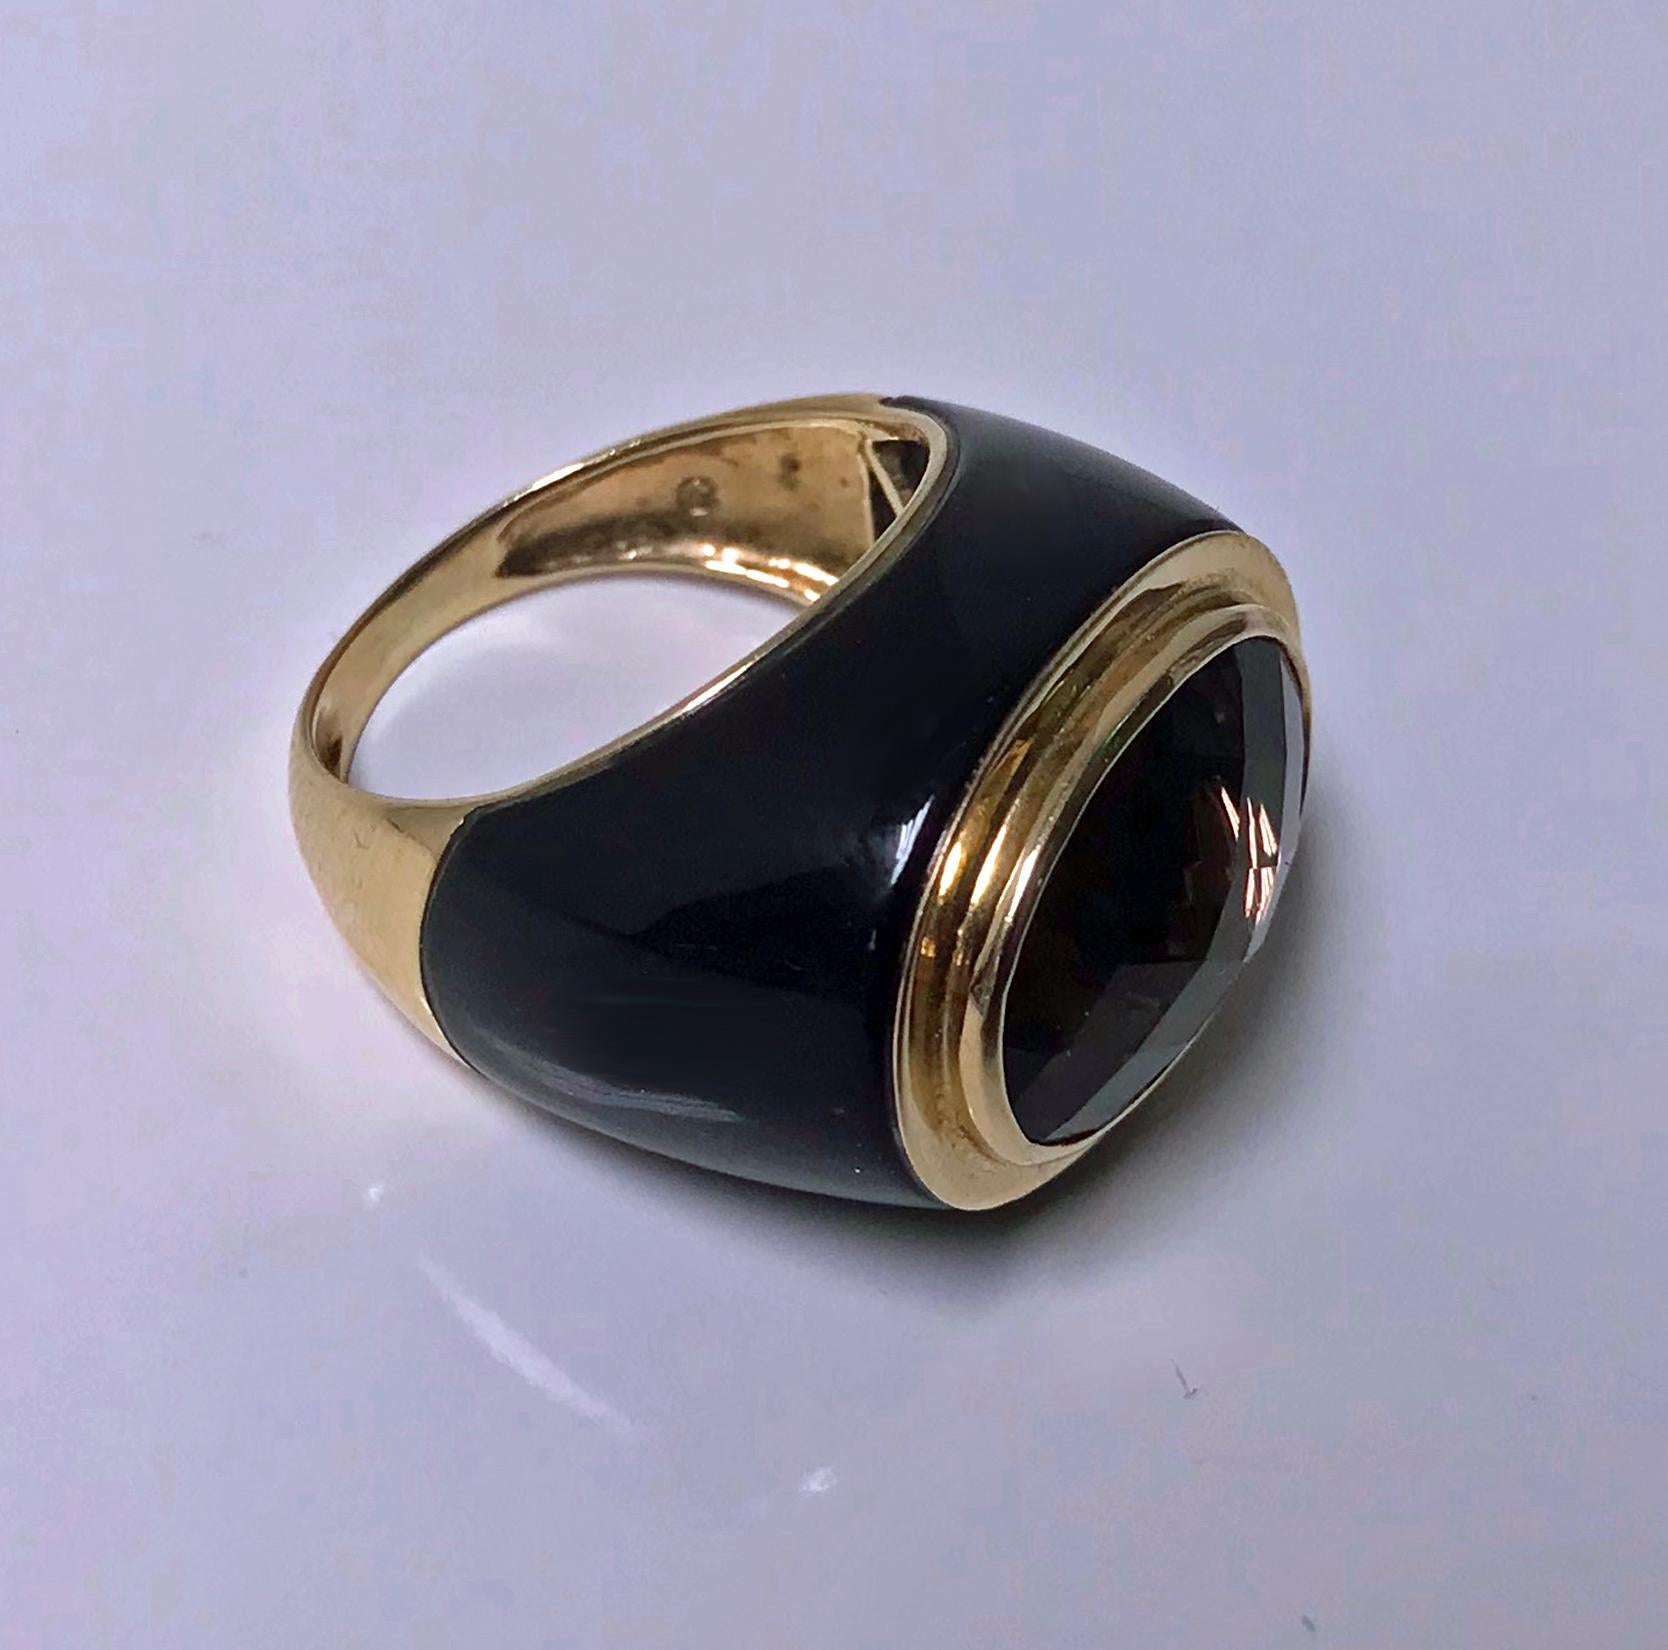 Gold Enamel Topaz Ring. The Ring 14K gold bezel set with a facetted smoky topaz, gauging approximately 15 x 12 mm, black enamel surround mount and shoulders, tapered gold shank, stamped 14K. Ring Size: 7. Item Weight: 9.70 grams. Ring measures